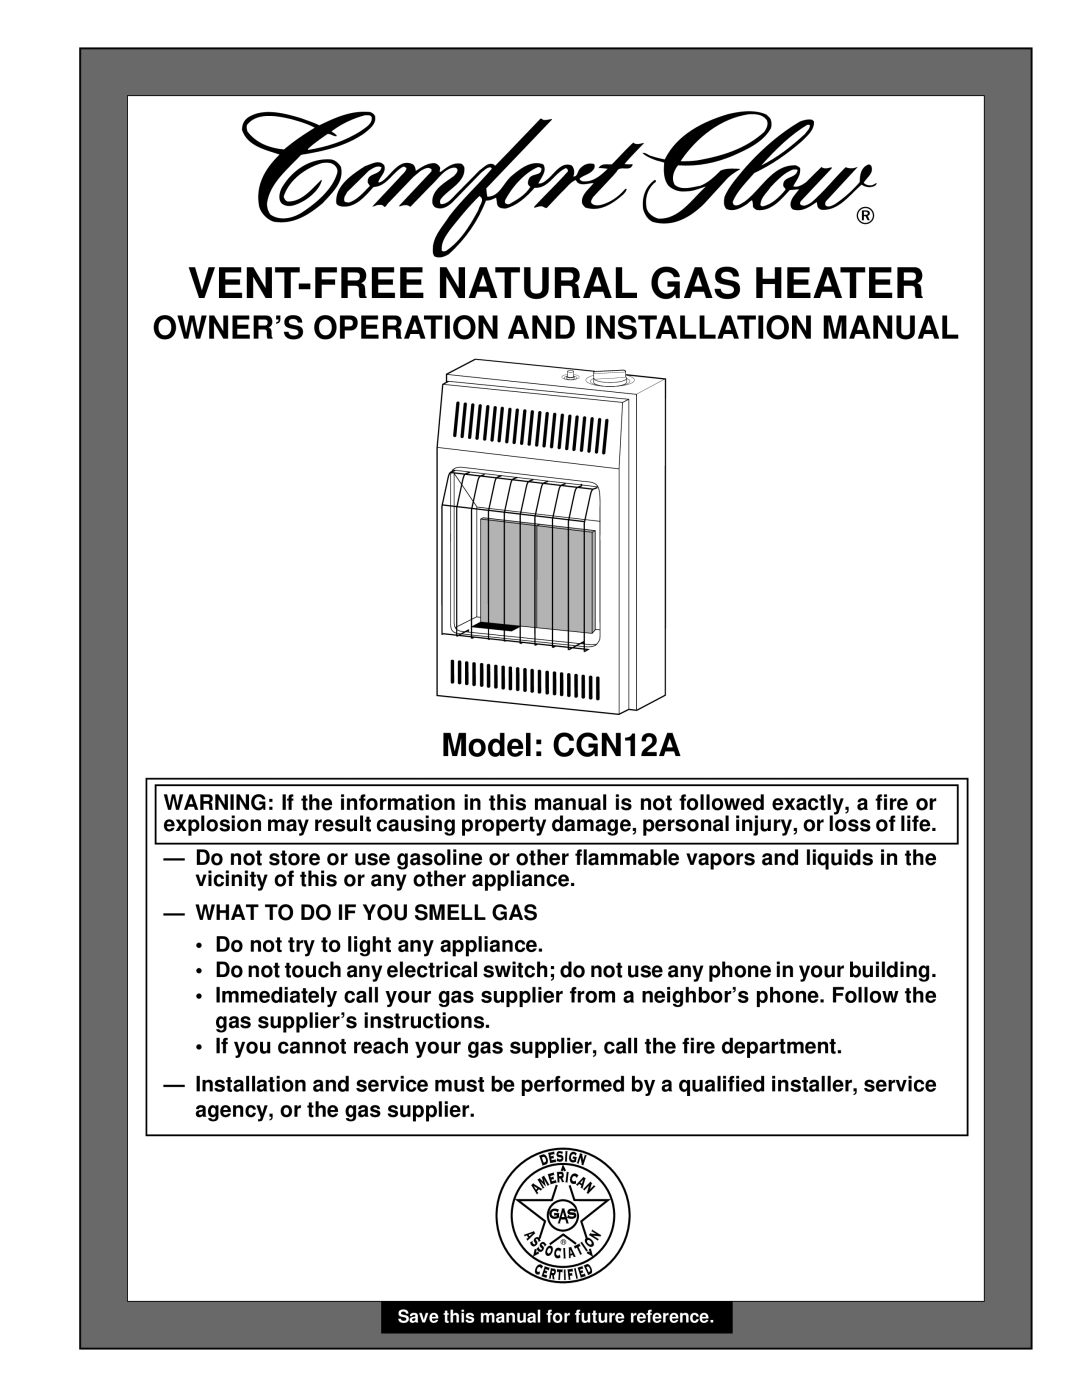 Desa installation manual Owner’S Operation And Installation Manual, Model CGN12A, Vent-Freenatural Gas Heater 